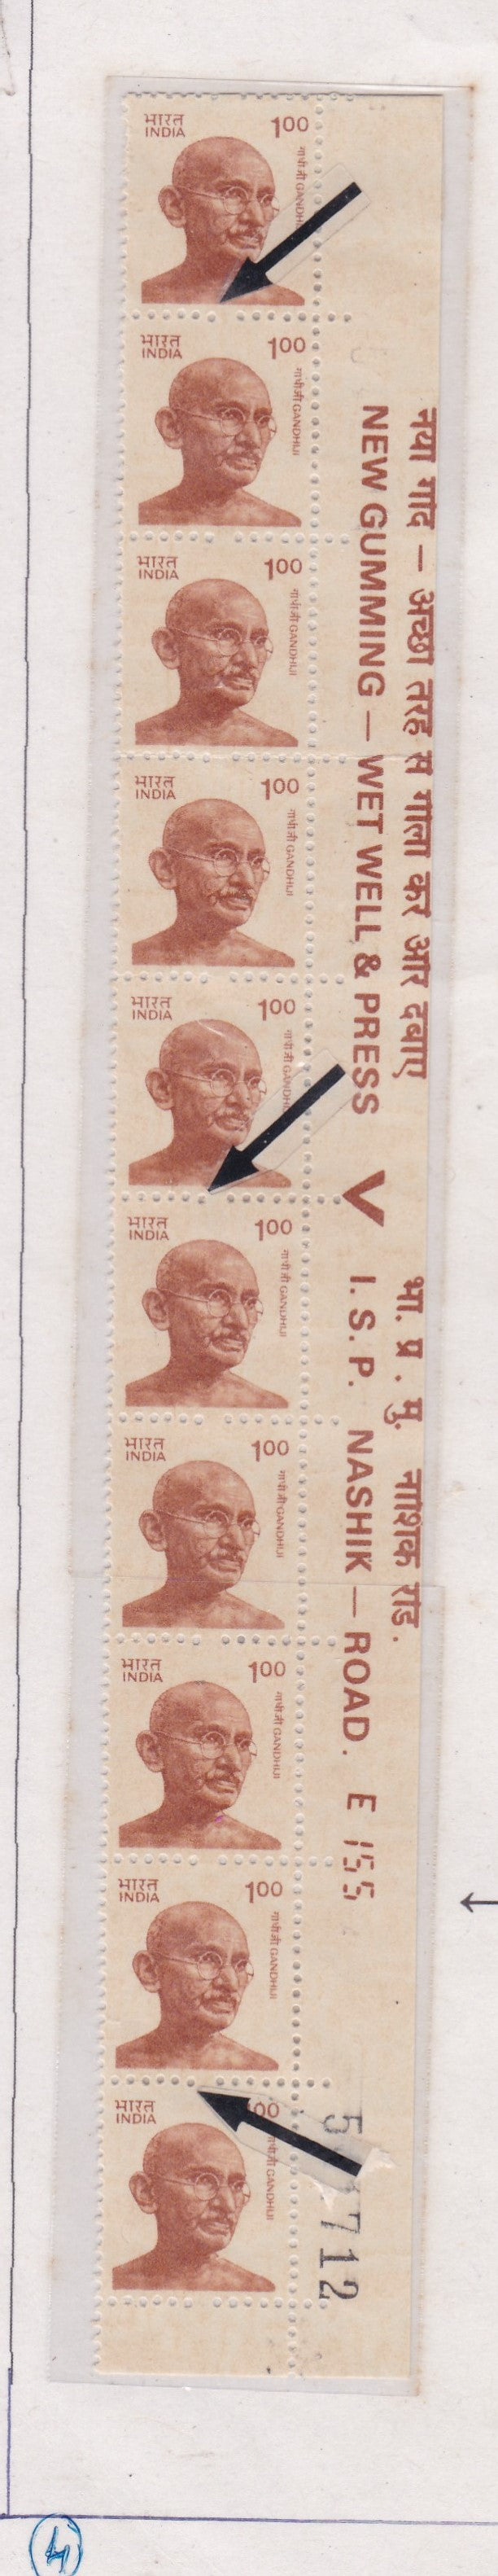 Perforation Errors-Partly Imperf Blocks & Strips Definitives